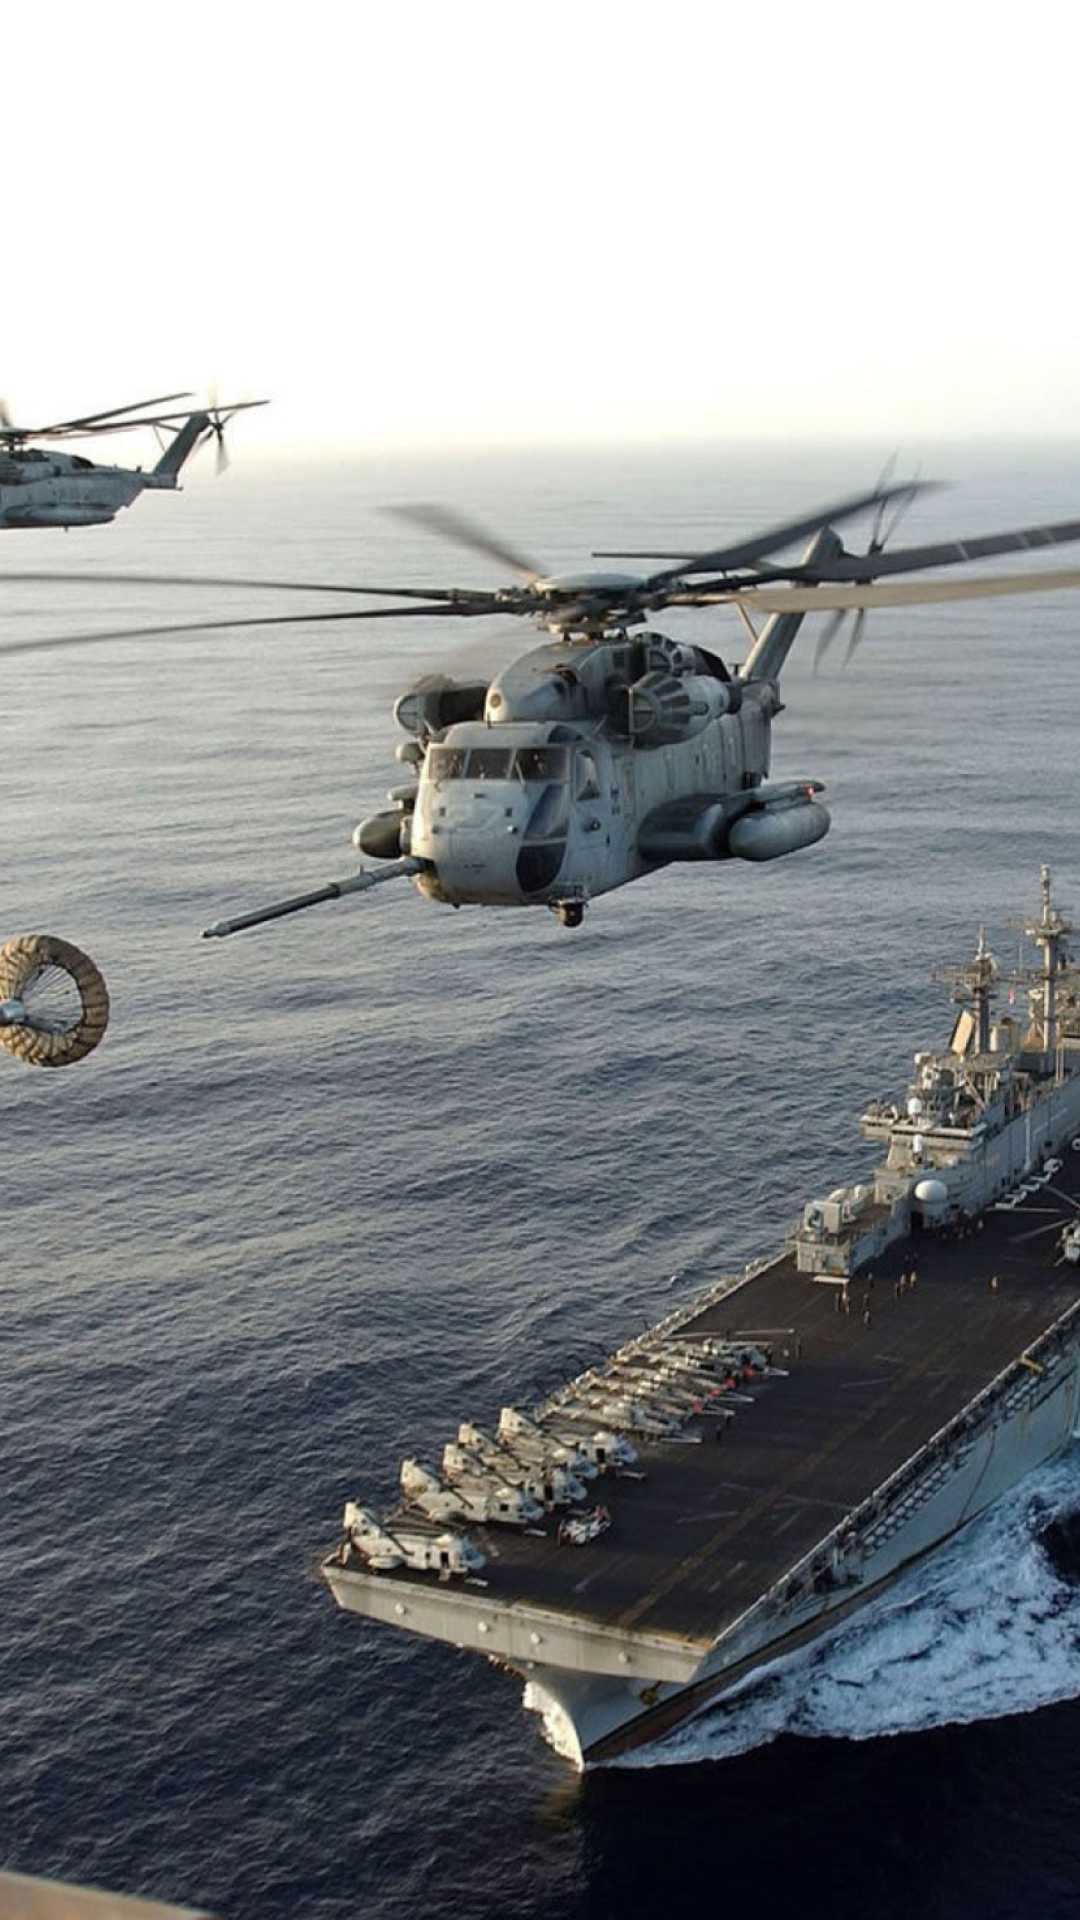 Обои Aircraft Carrier And Helicopter 1080x1920